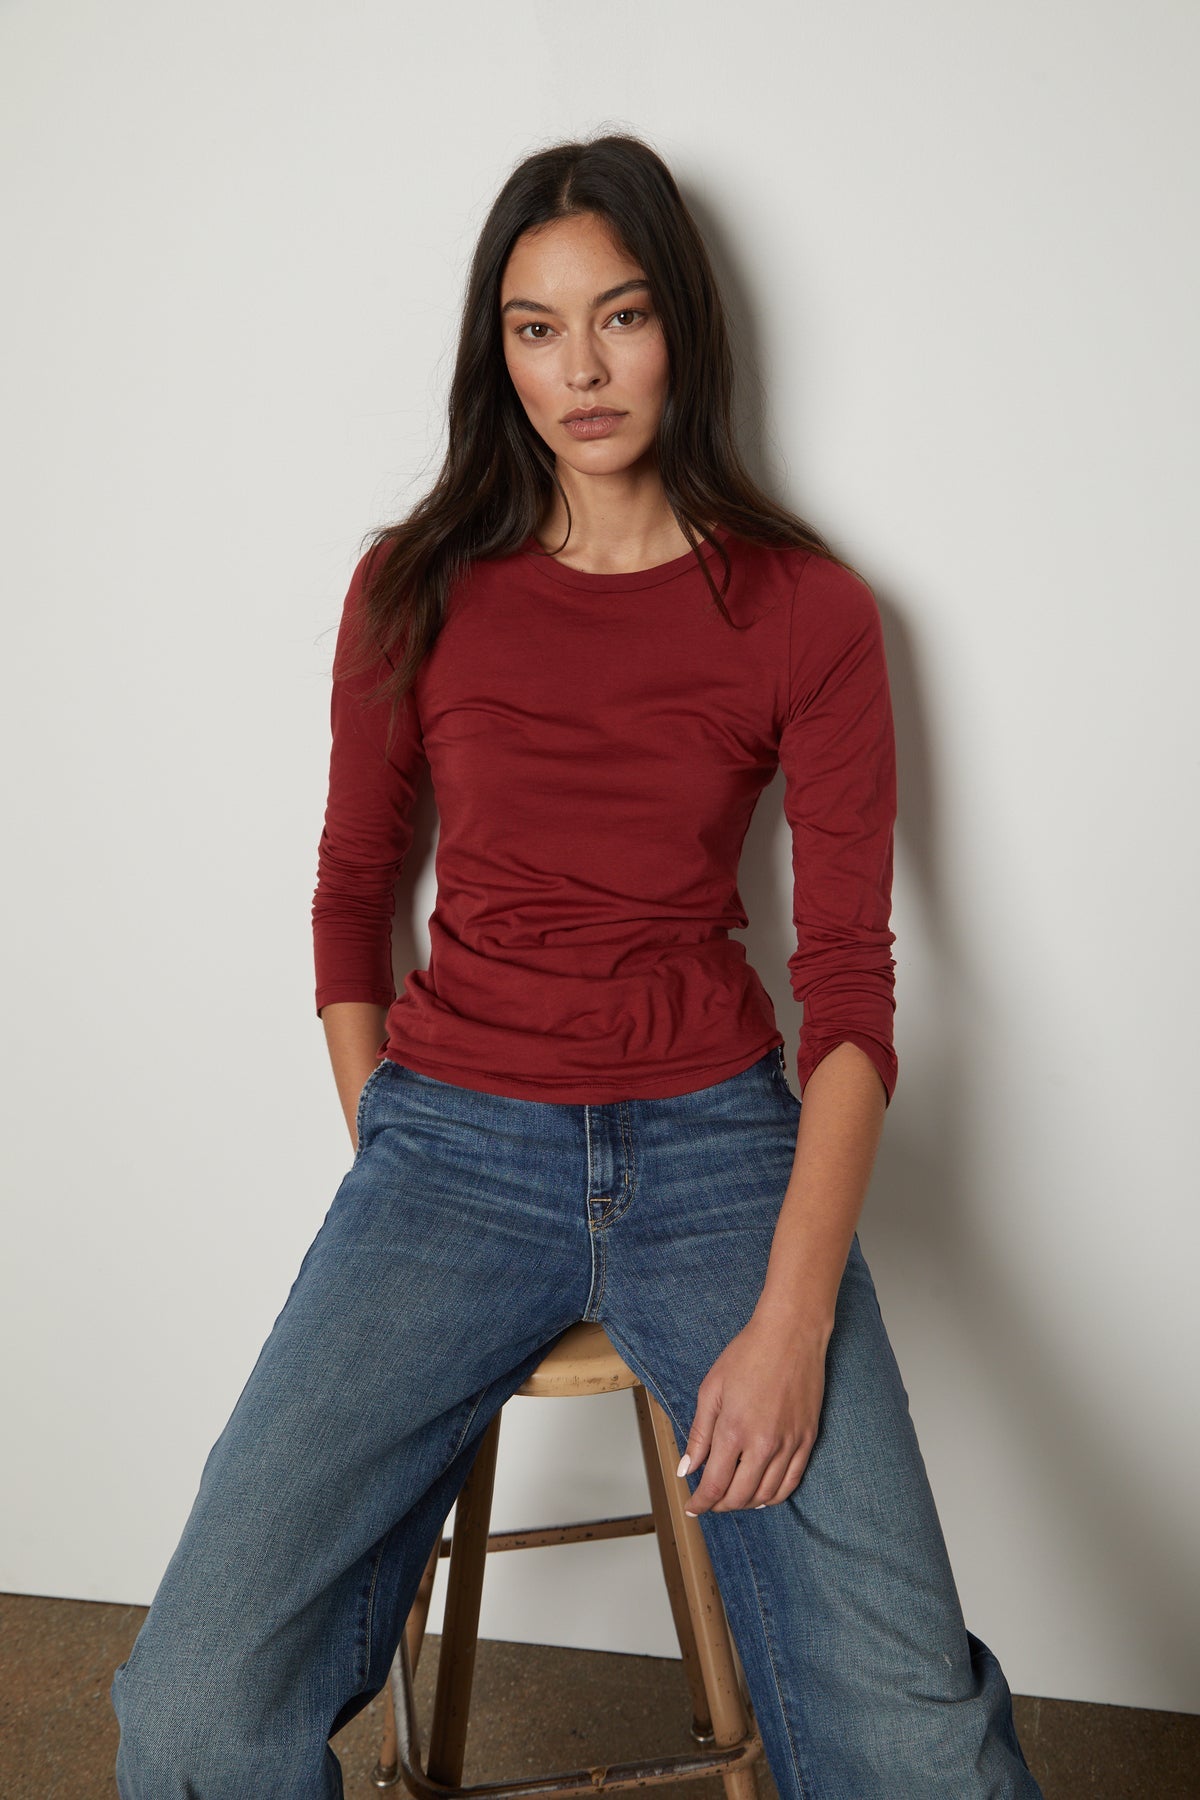   A woman wearing a red ZOFINA GAUZY WHISPER FITTED CREW NECK TEE by Velvet by Graham & Spencer. 